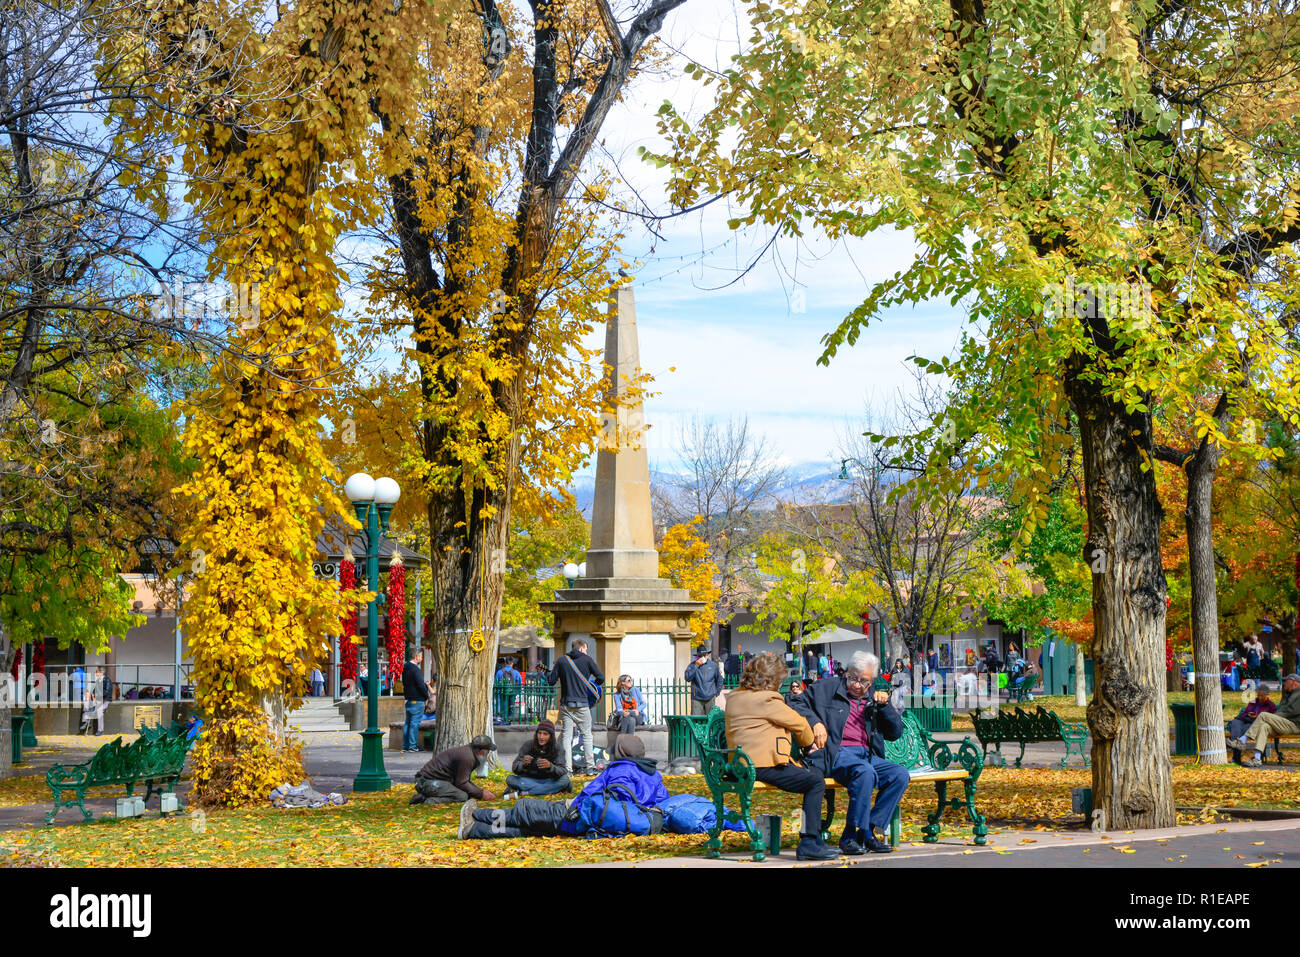 During Autumn foliage change, and red chili ristras hanging  from lamp posy, People stroll and enjoy The Plaza in the center of downtown Santa Fe, NM Stock Photo